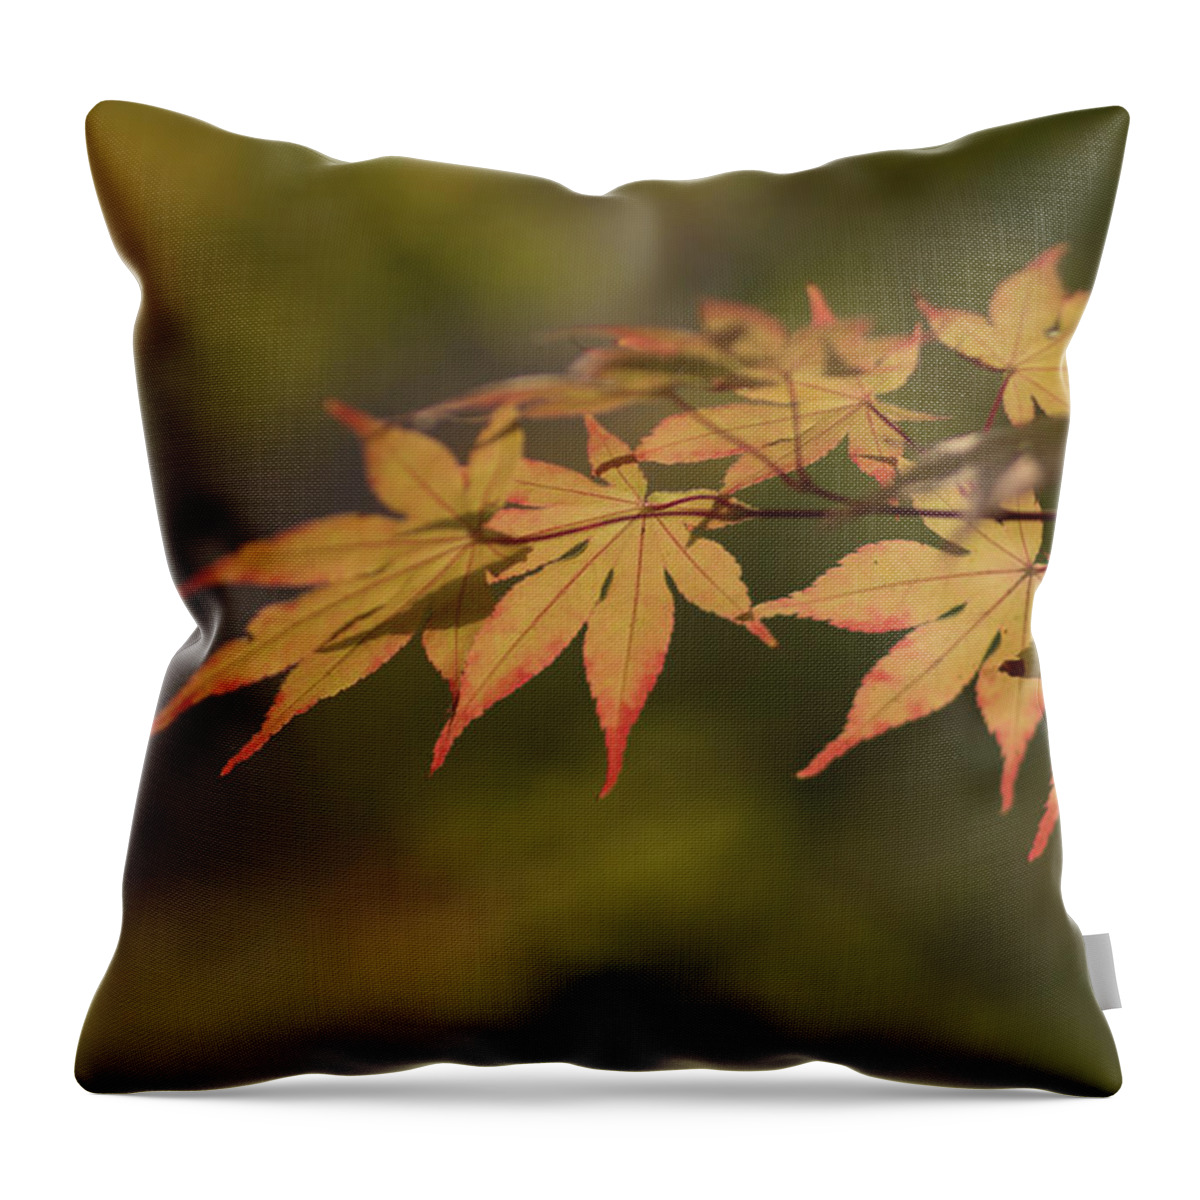 Autume Throw Pillow featuring the photograph Maple by Hyuntae Kim